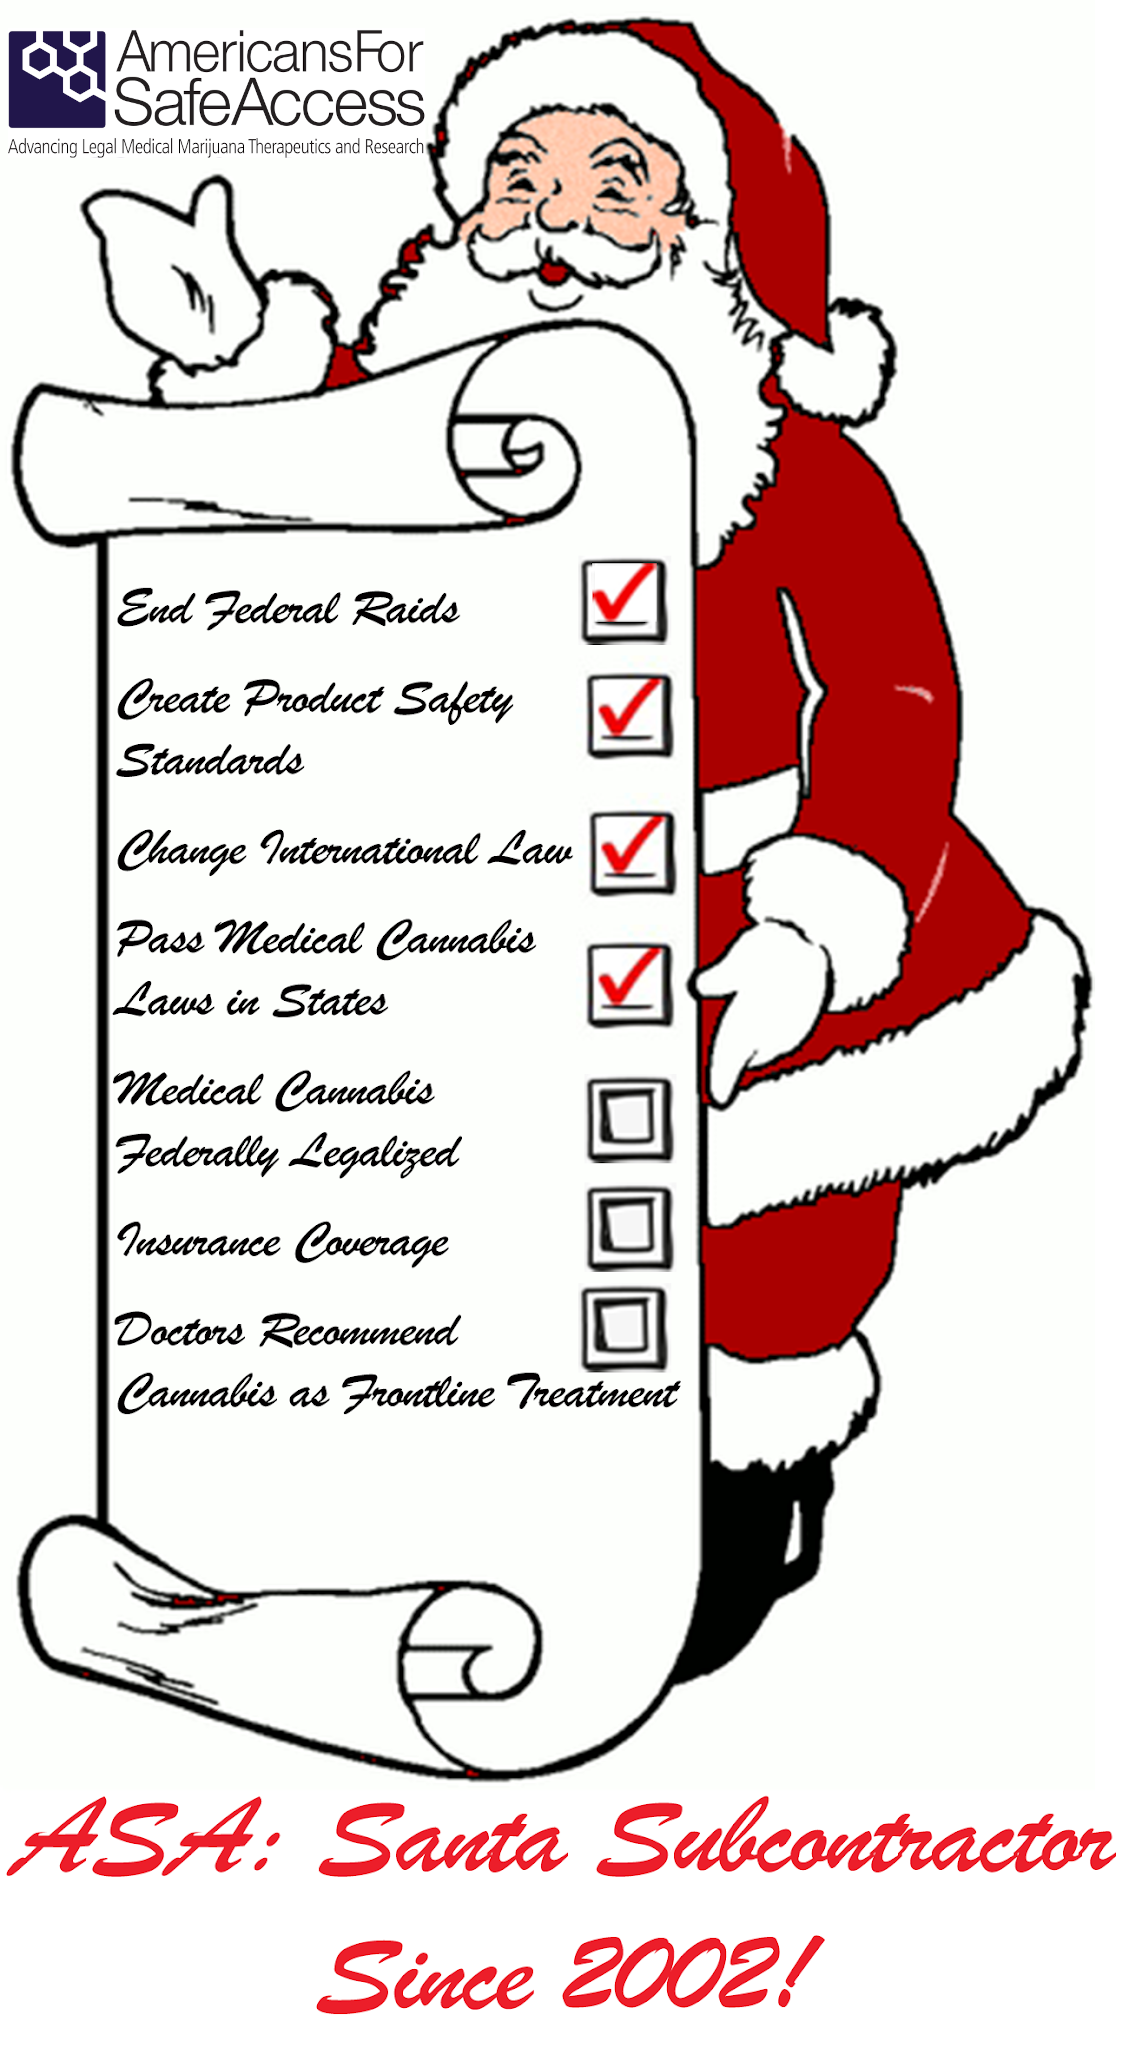 A picture of Santa Claus holding a list of accomplishments. End

Federal Raids, Create Product Safety Standards, Change International

Law, Pass Medical Cannabis Laws in States, are all checked items.

Medical Cannabis Federally Legalized, Insurance Coverage, and Doctors

Recommend Cannabis as Frontline Treatment, remain unchecked.